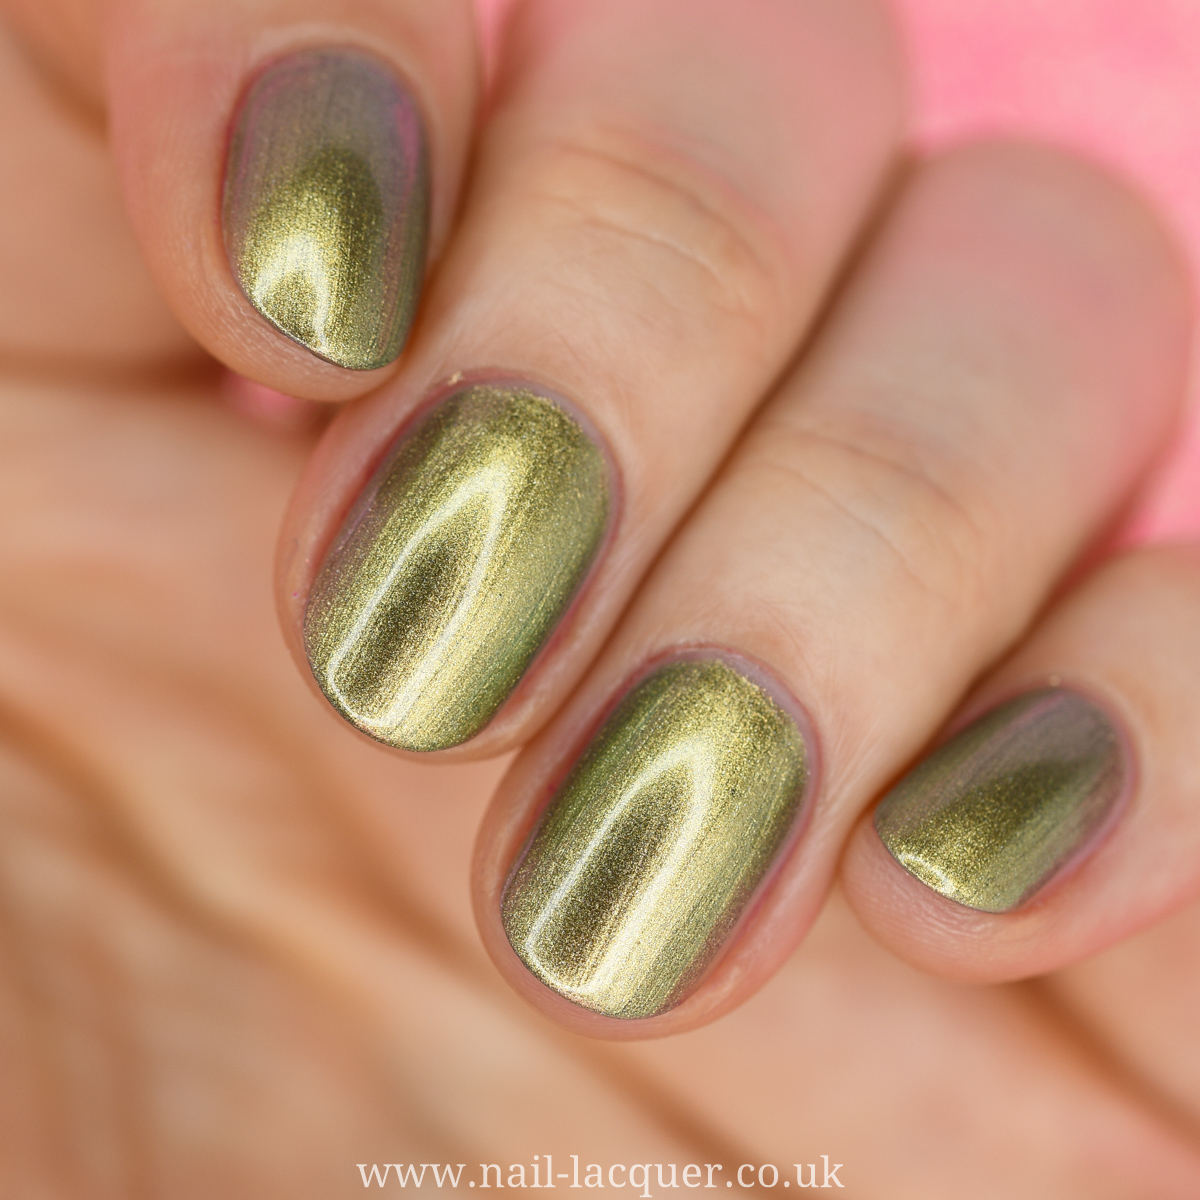 Chanel Peridot review and swatches by Nail Lacquer UK blog